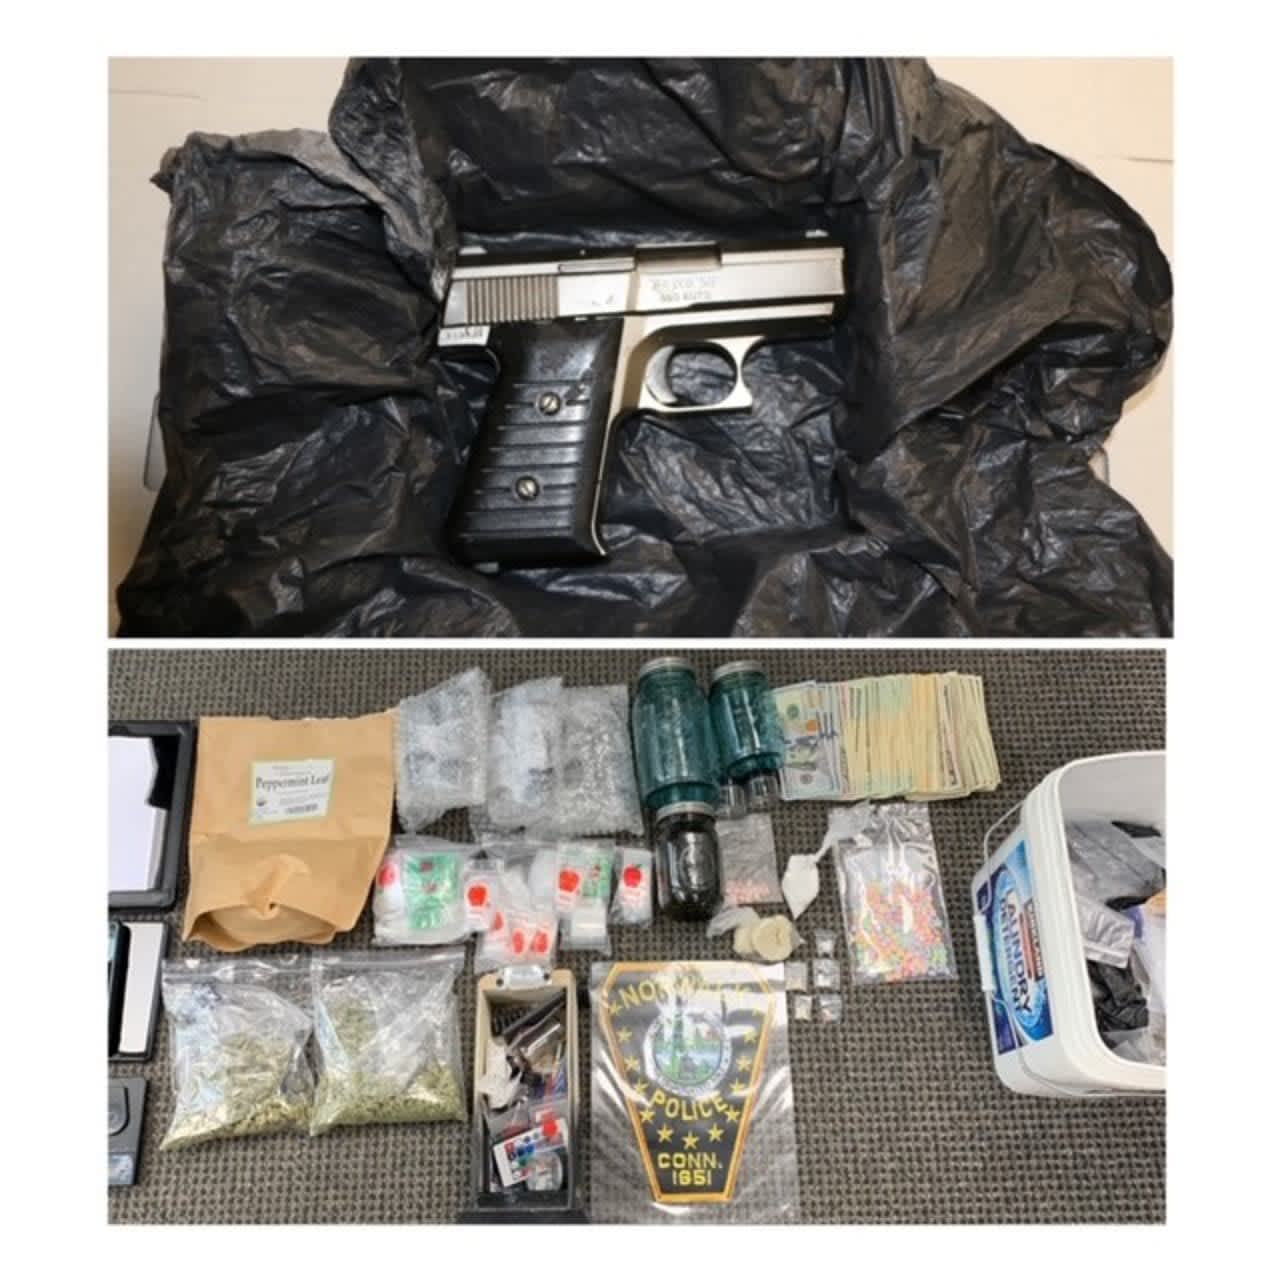 Drugs and a handgun were seized by Howell police.